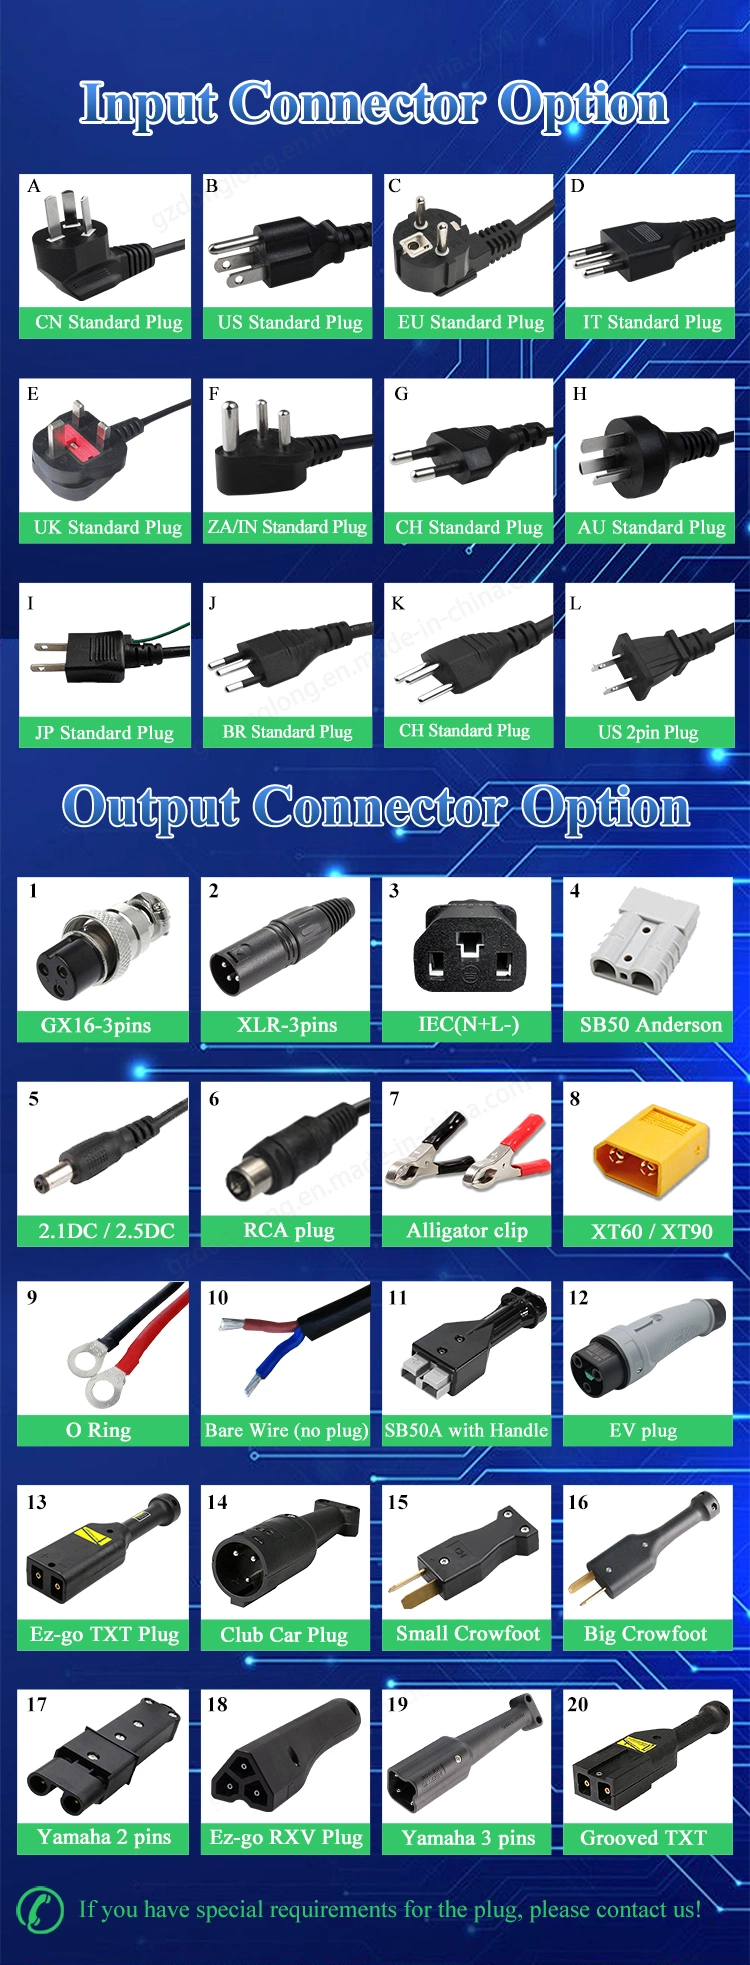 for Vehicles Golf Carts etc. 900W 36V18A IP67 Waterproof Smart Chargers for EV 36V Onboard Lead Acid Charger